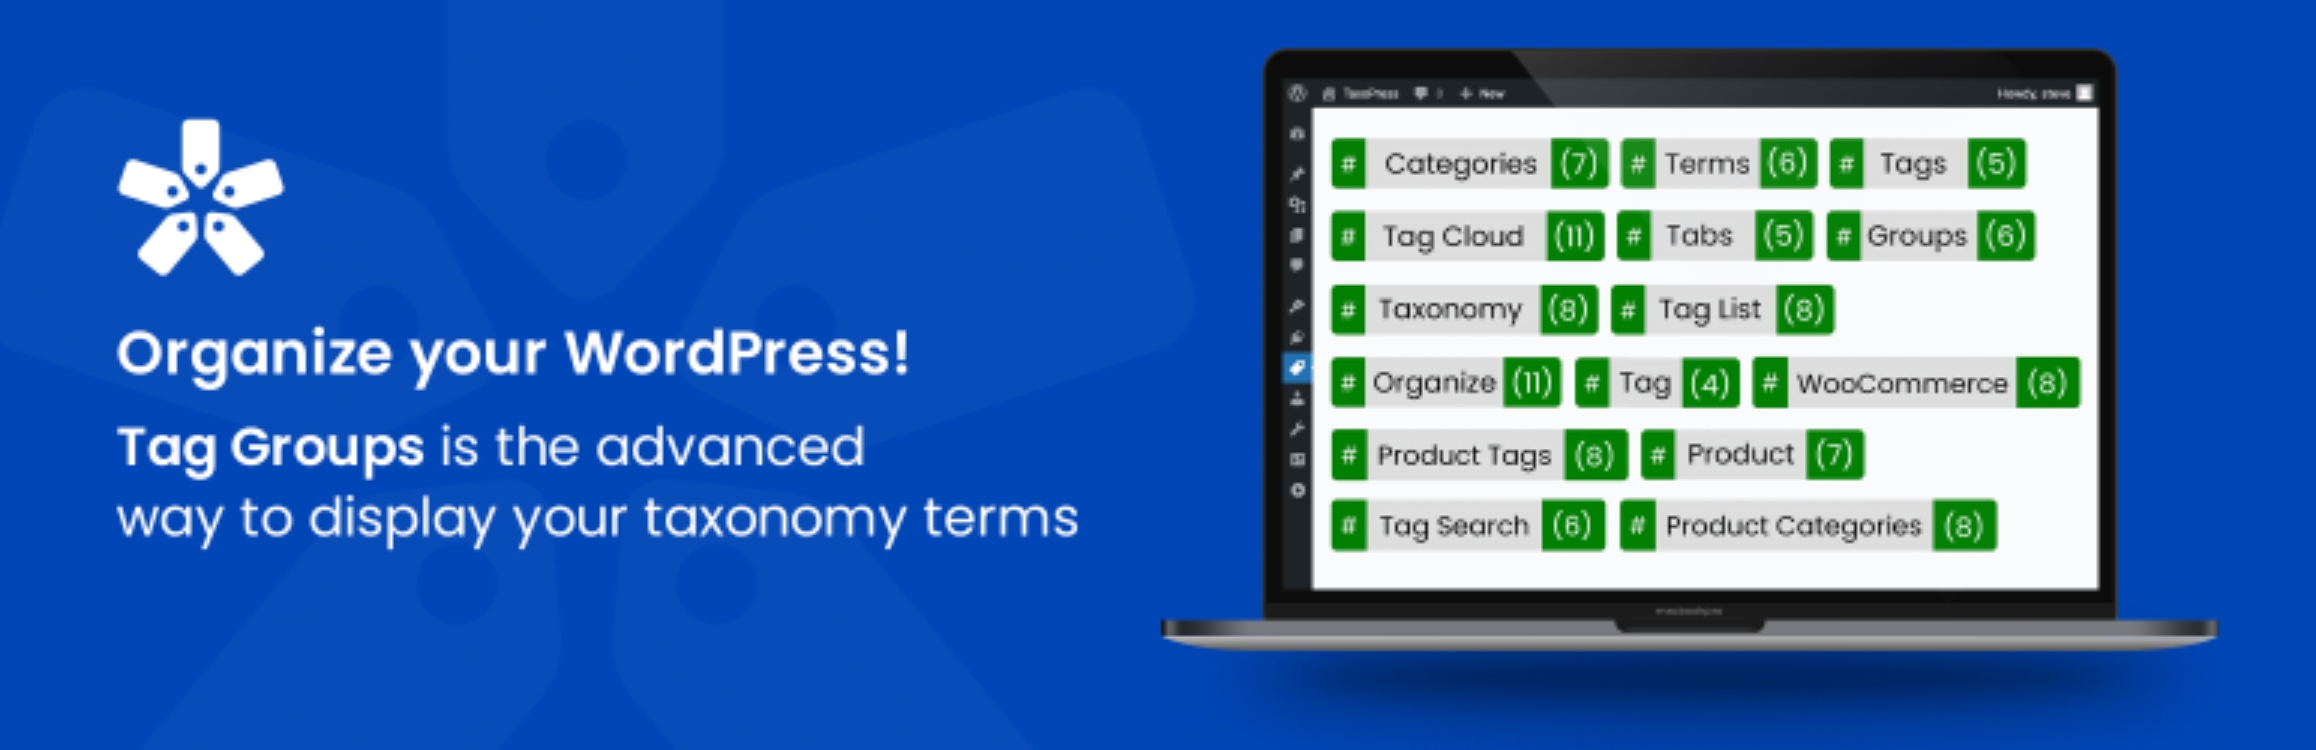 Tag Groups Is The Advanced Way To Display Your Taxonomy Terms Preview Wordpress Plugin - Rating, Reviews, Demo & Download